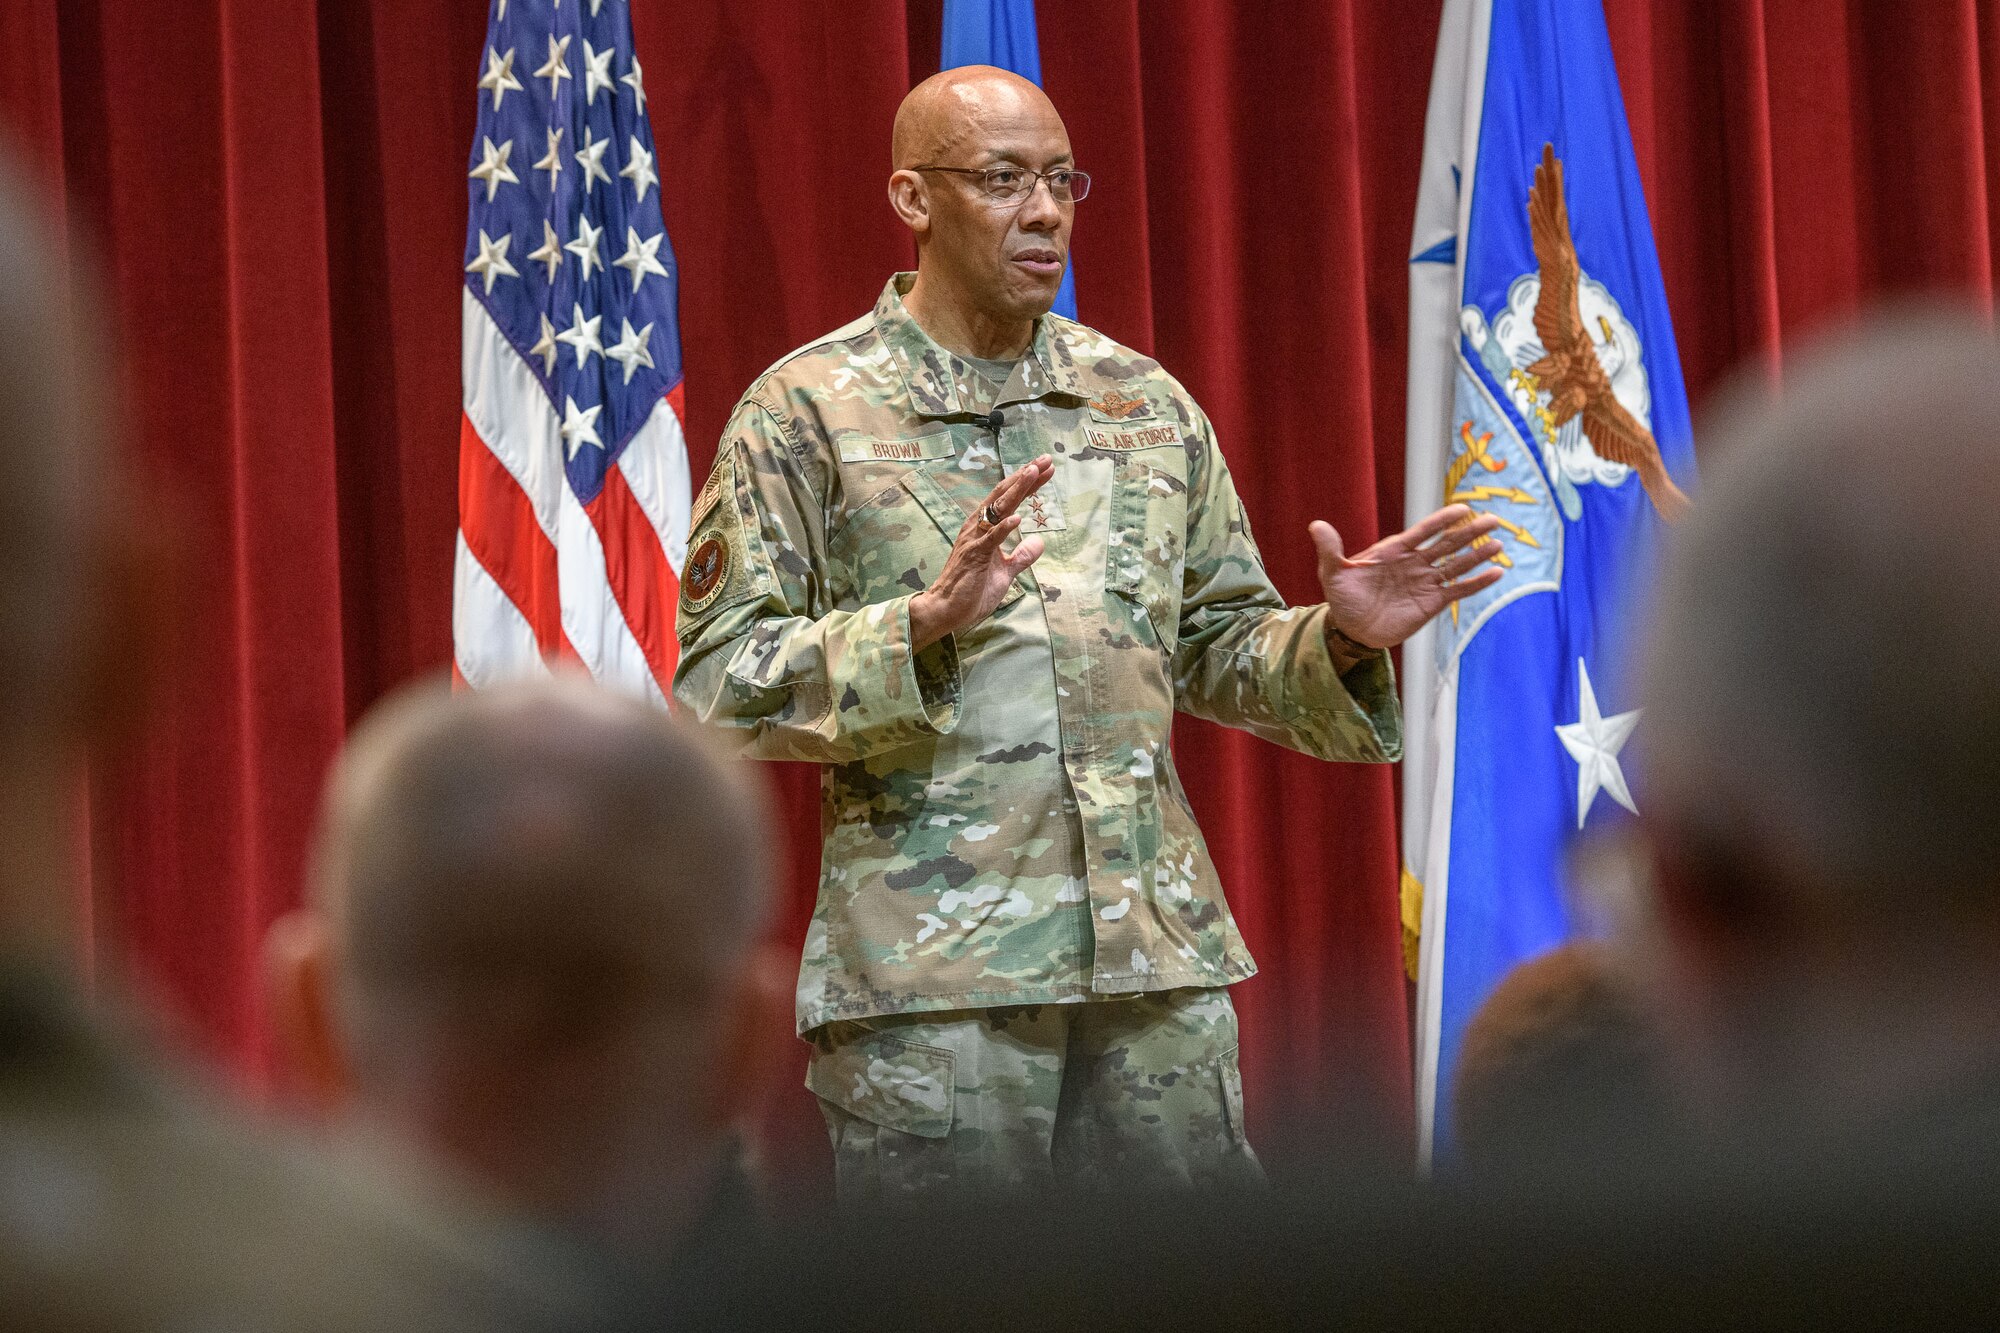 Air Force Chief of Staff Gen. CQ Brown, Jr. addresses guests at the Secretary of the Air Force National Security Forum